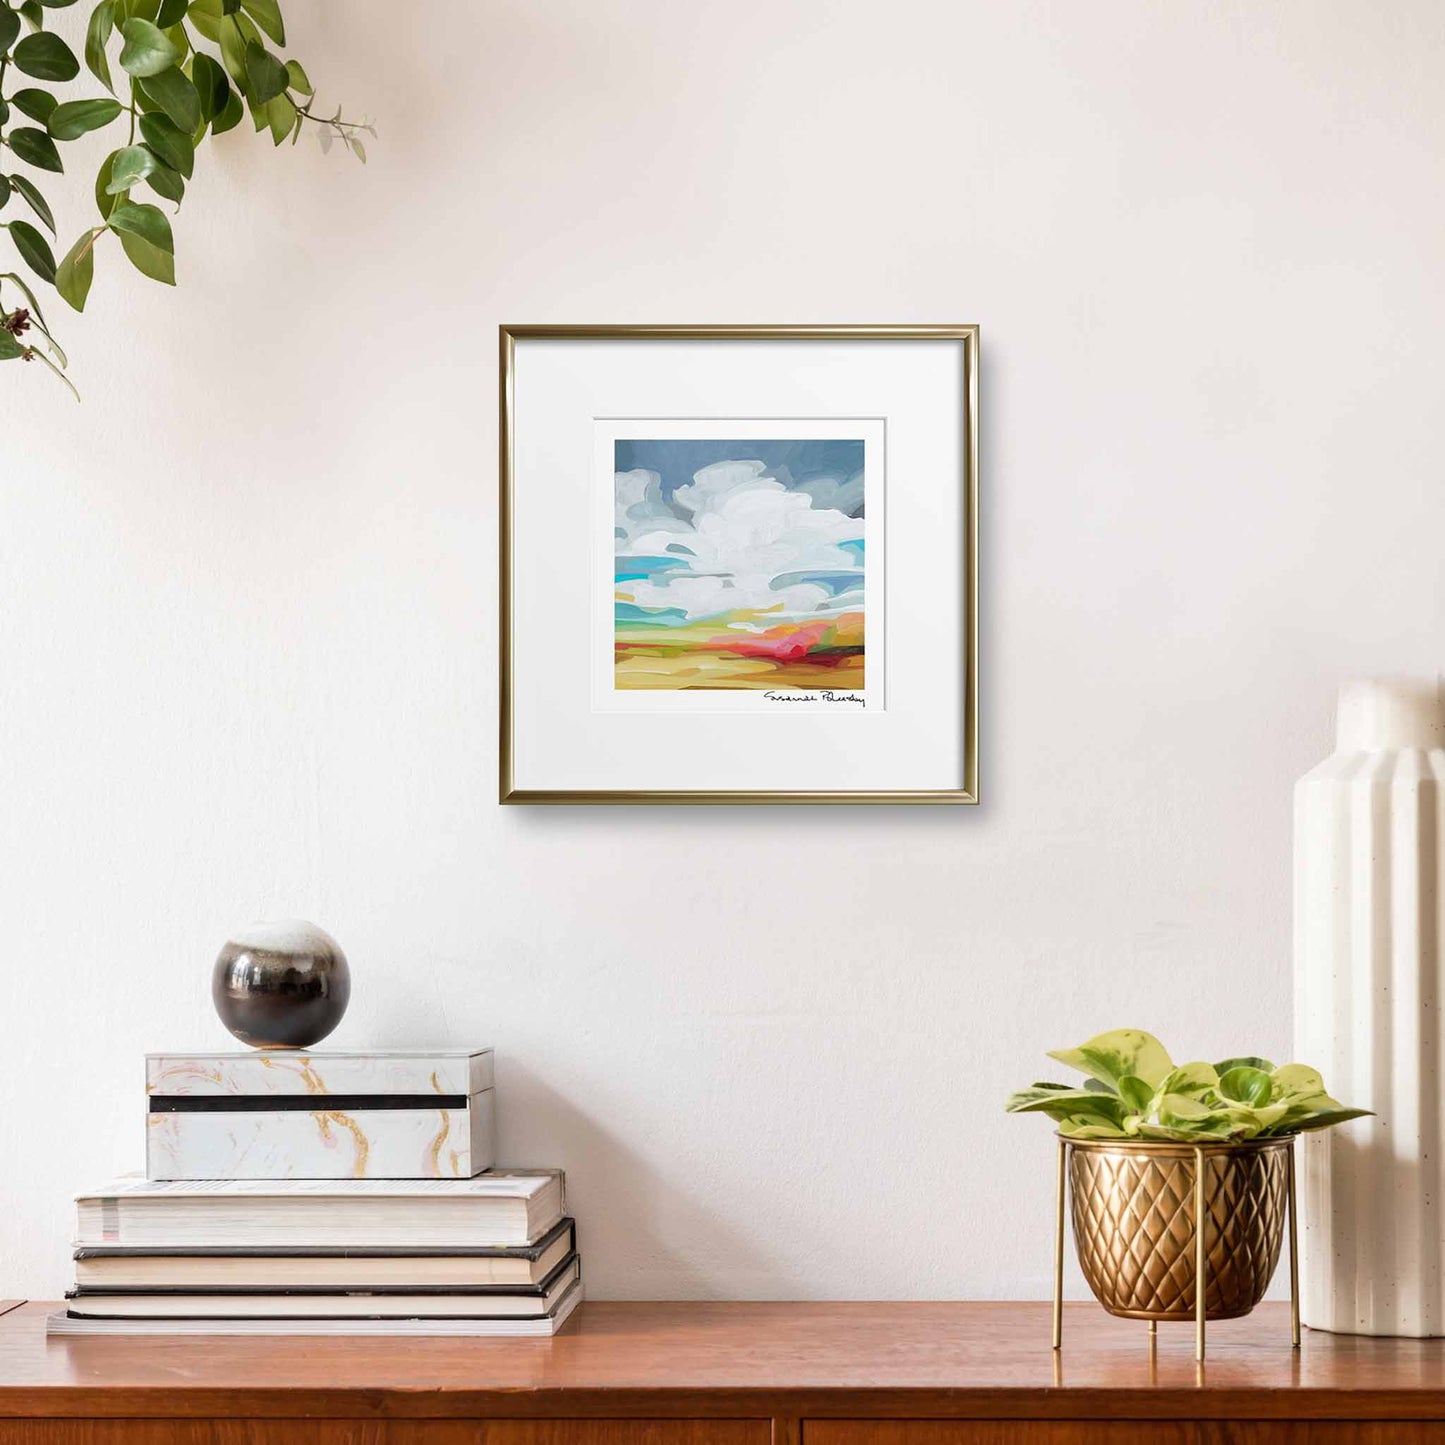 Framed 10x10 wall art of golden sunset painting by Canadian abstract artist Susannah Bleasby